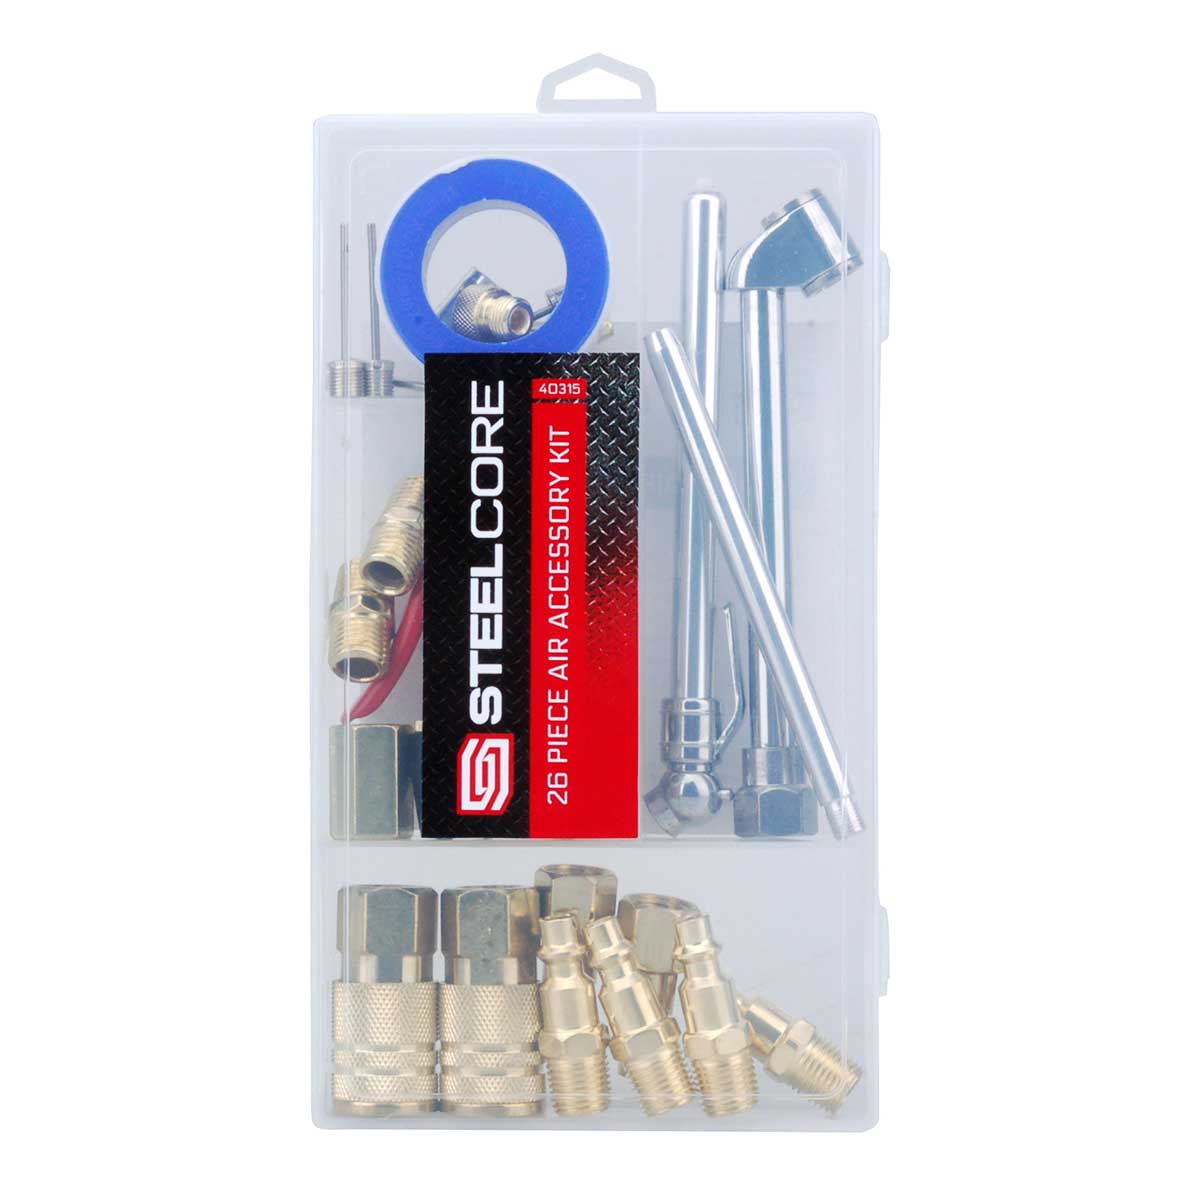 Steel Core Air Accessory Kit, 26 Pieces - 0000000558 - Runnings